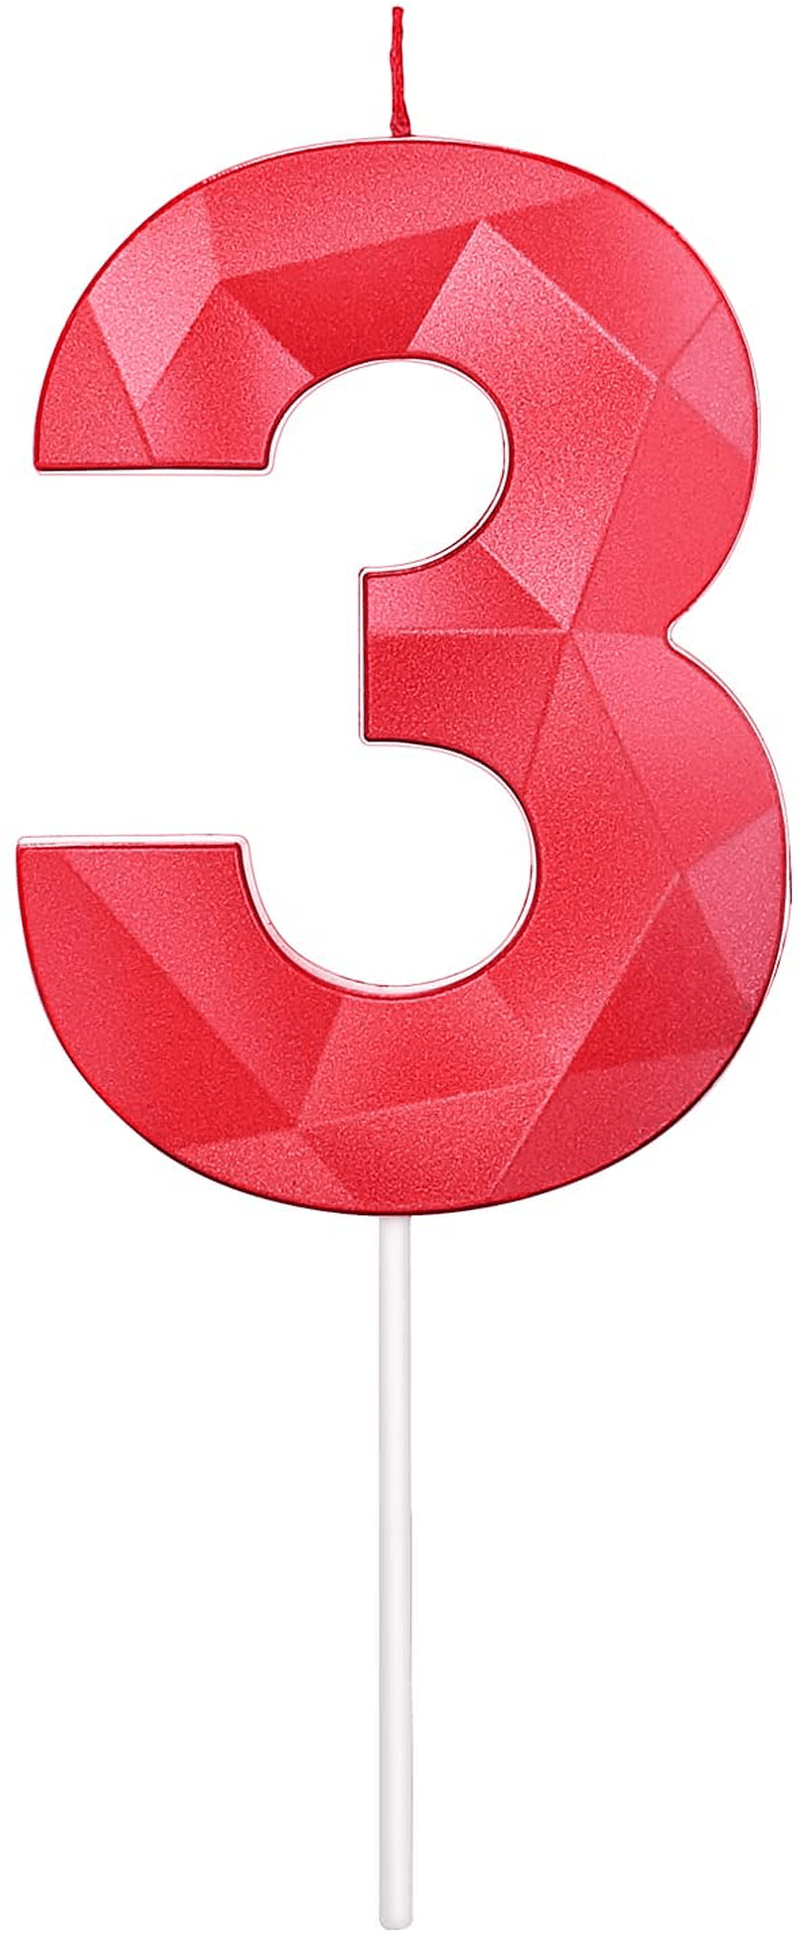 2.76 Inches 3D Diamond Shape Birthday Cake Candle Number 2 ,Red Color Happy Birthday Cake Cupcake Toppers Decoration for Wedding Anniversary,Party Celebration,Family Baking(RED Number 2)